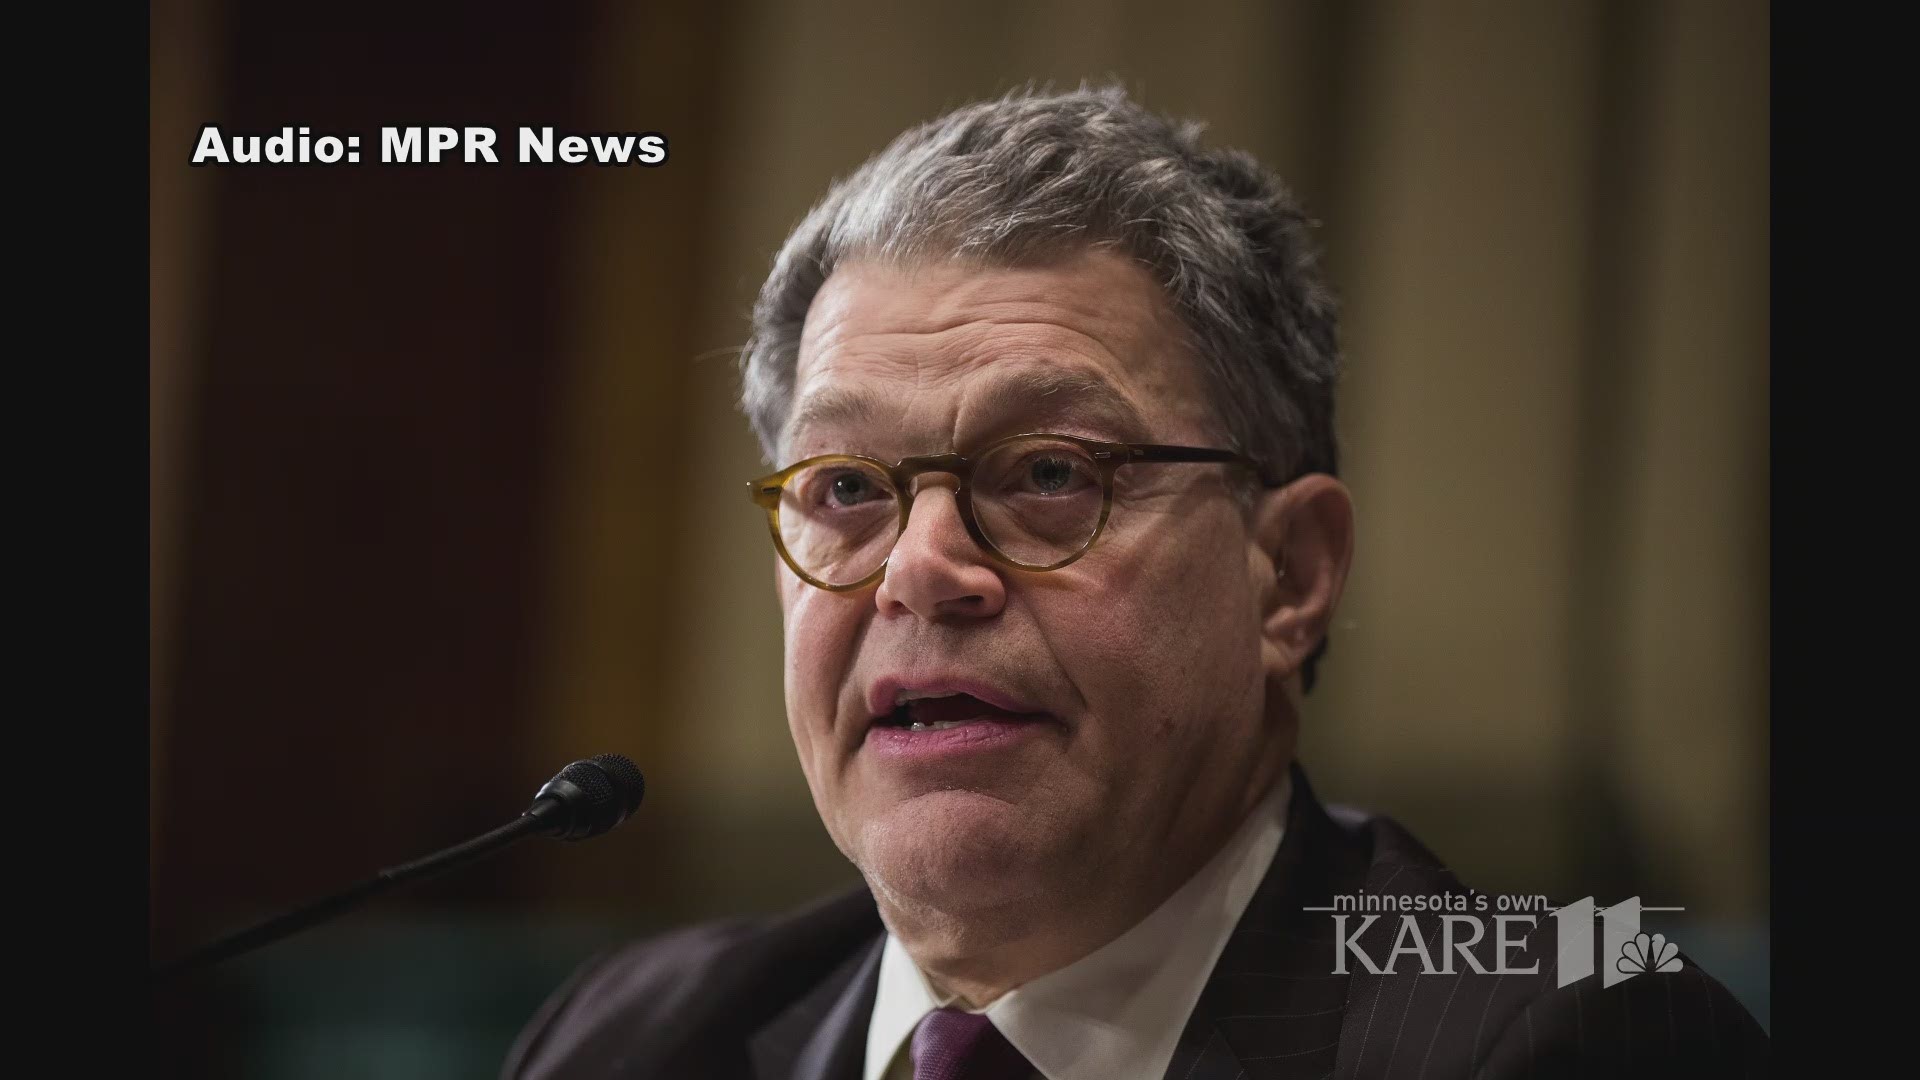 Sen. Al Franken tells MPR News that he has "a long way to go" in regaining Minnesotans' trust after a series of sexual misconduct allegations, but that he will be back at work on Monday.